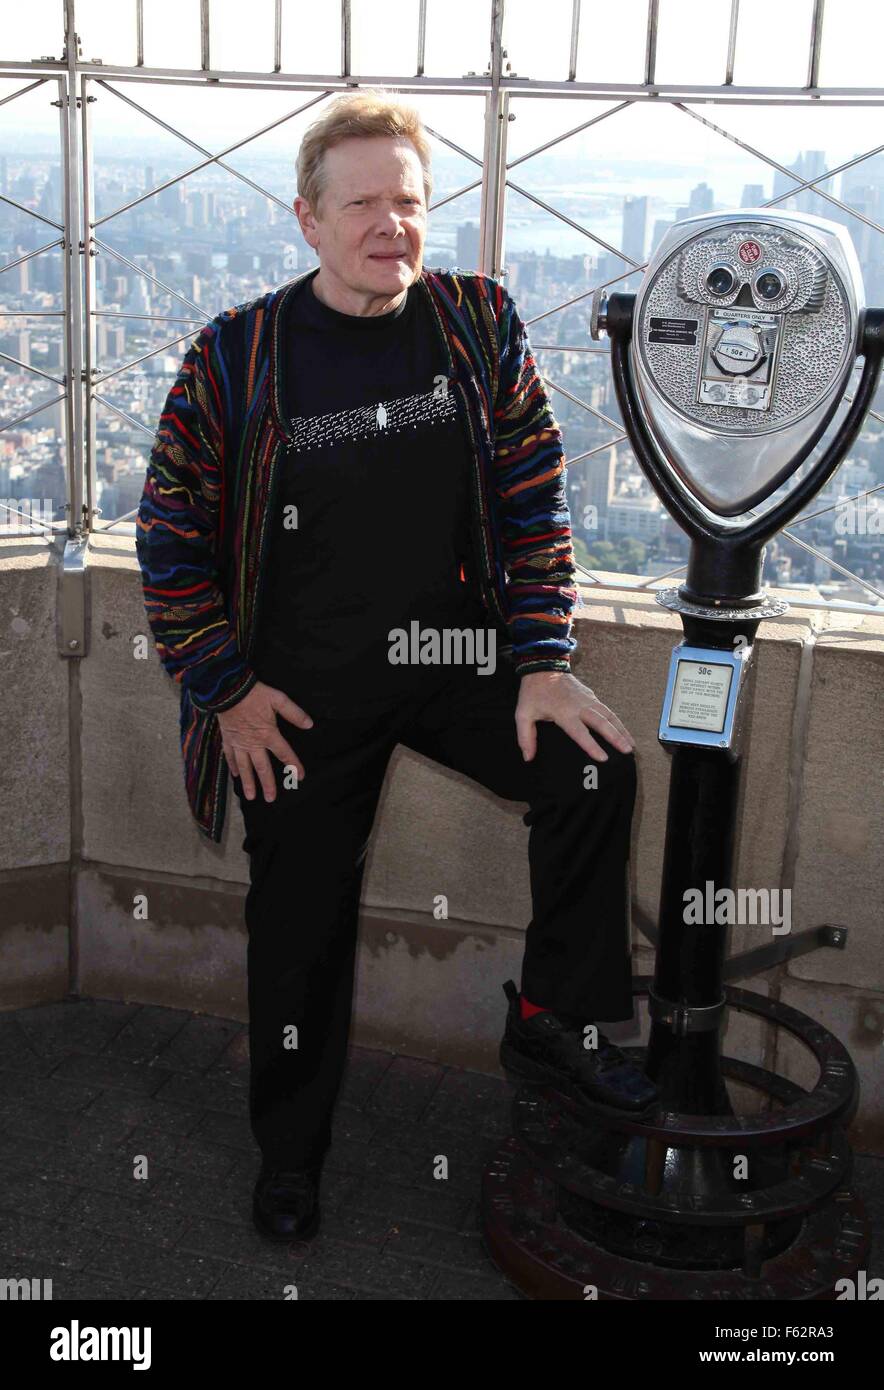 https://c8.alamy.com/comp/F62RA3/philippe-petit-the-french-high-wire-artist-who-inspired-the-walk-by-F62RA3.jpg